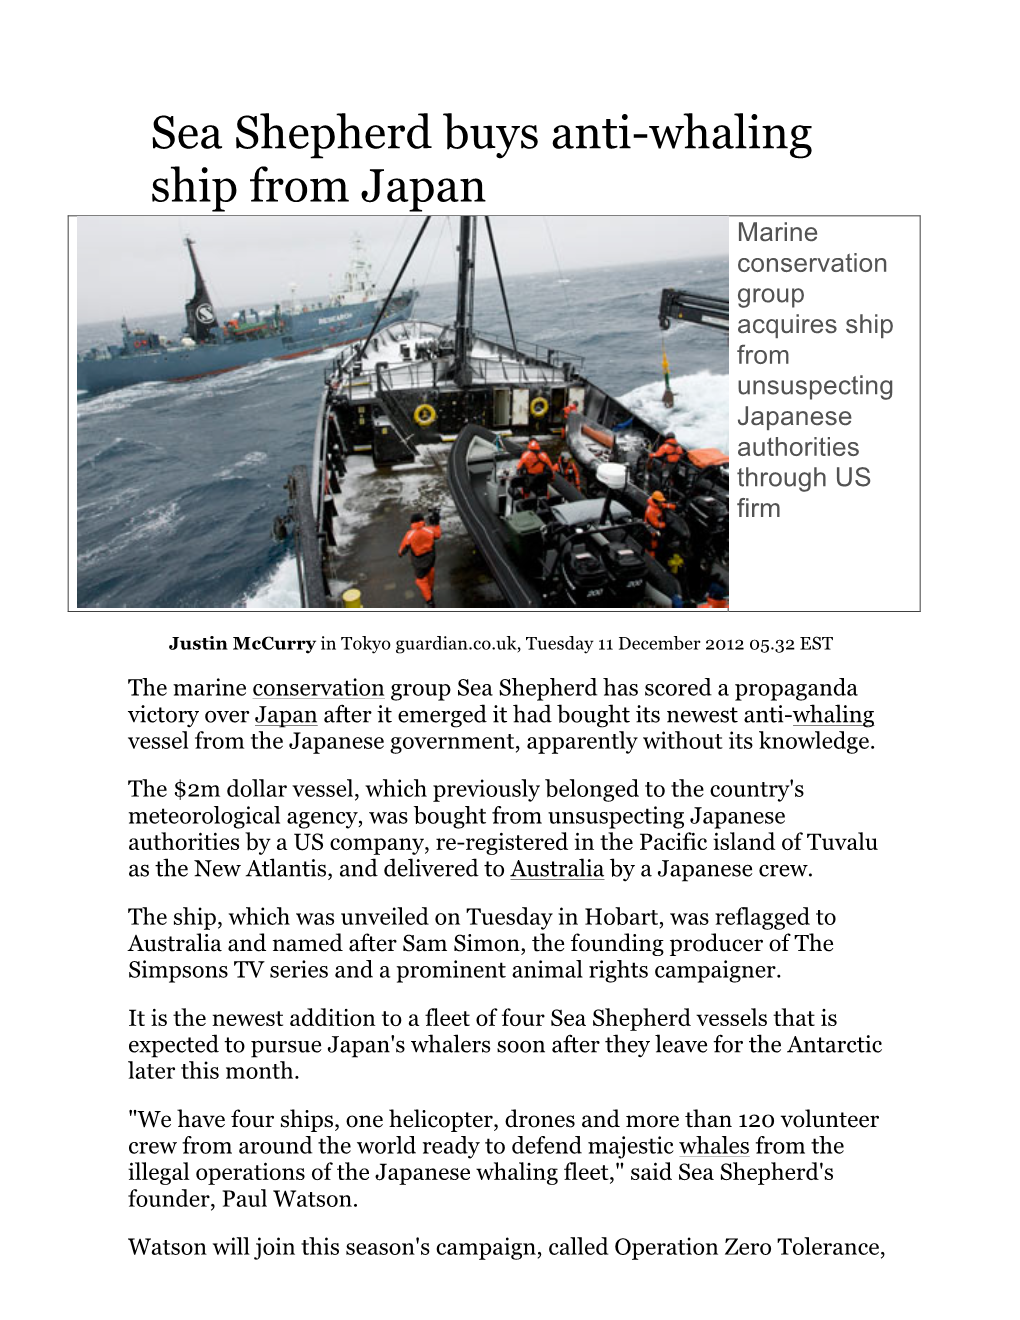 Sea Shepherd Buys Anti-Whaling Ship from Japan Marine Conservation Group Acquires Ship from Unsuspecting Japanese Authorities Through US Firm